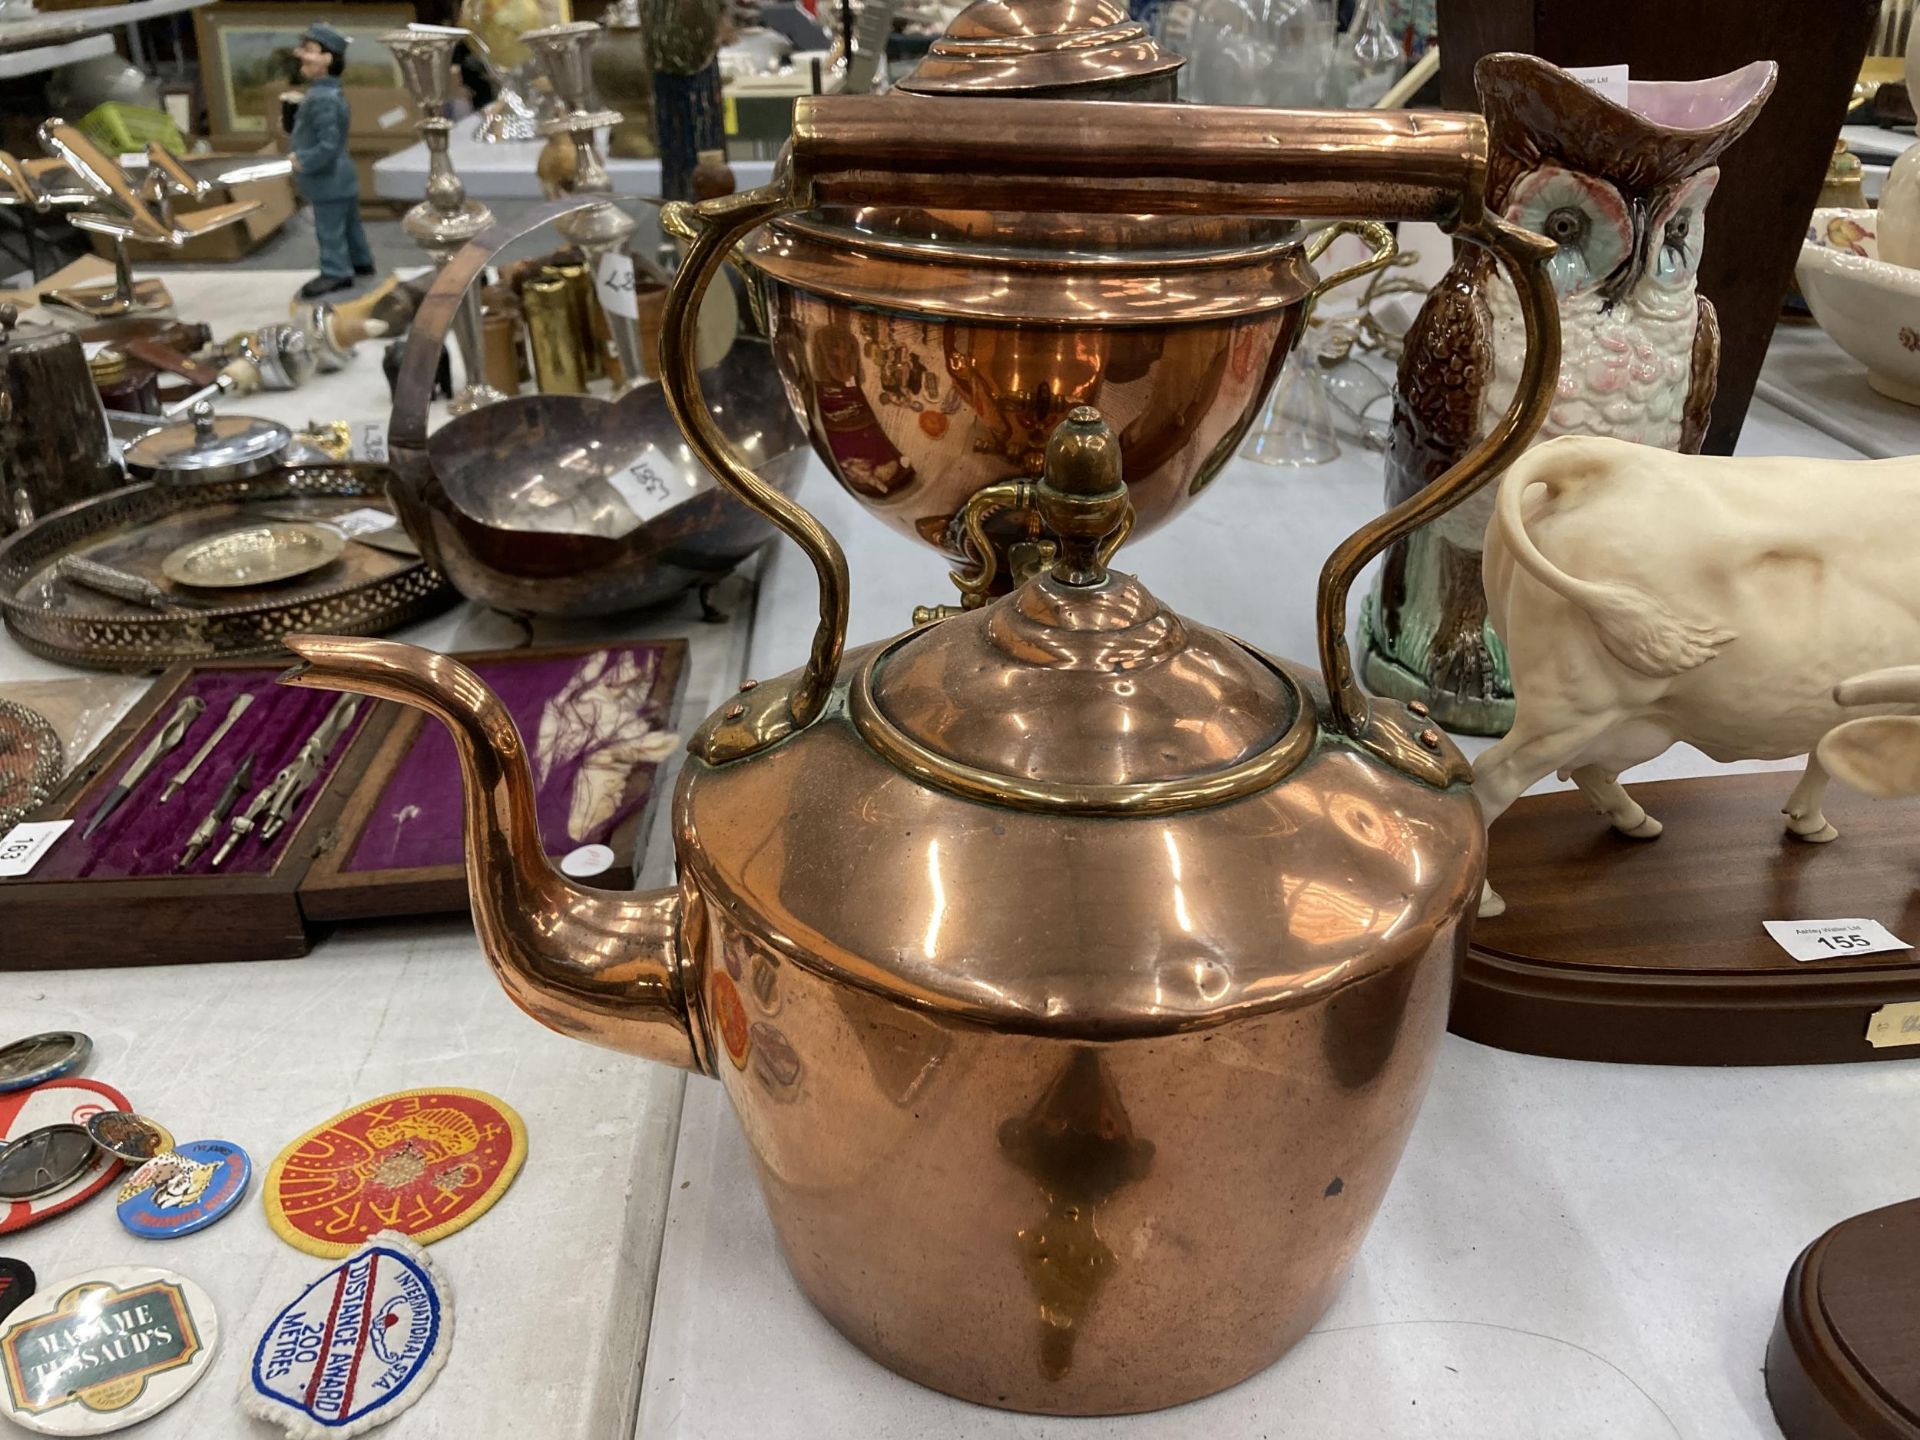 A LARGE VINTAGE COPPER KETTLE WITH ACORN FINIAL, COPPER TEA URN AND WALL POCKET - Image 3 of 4